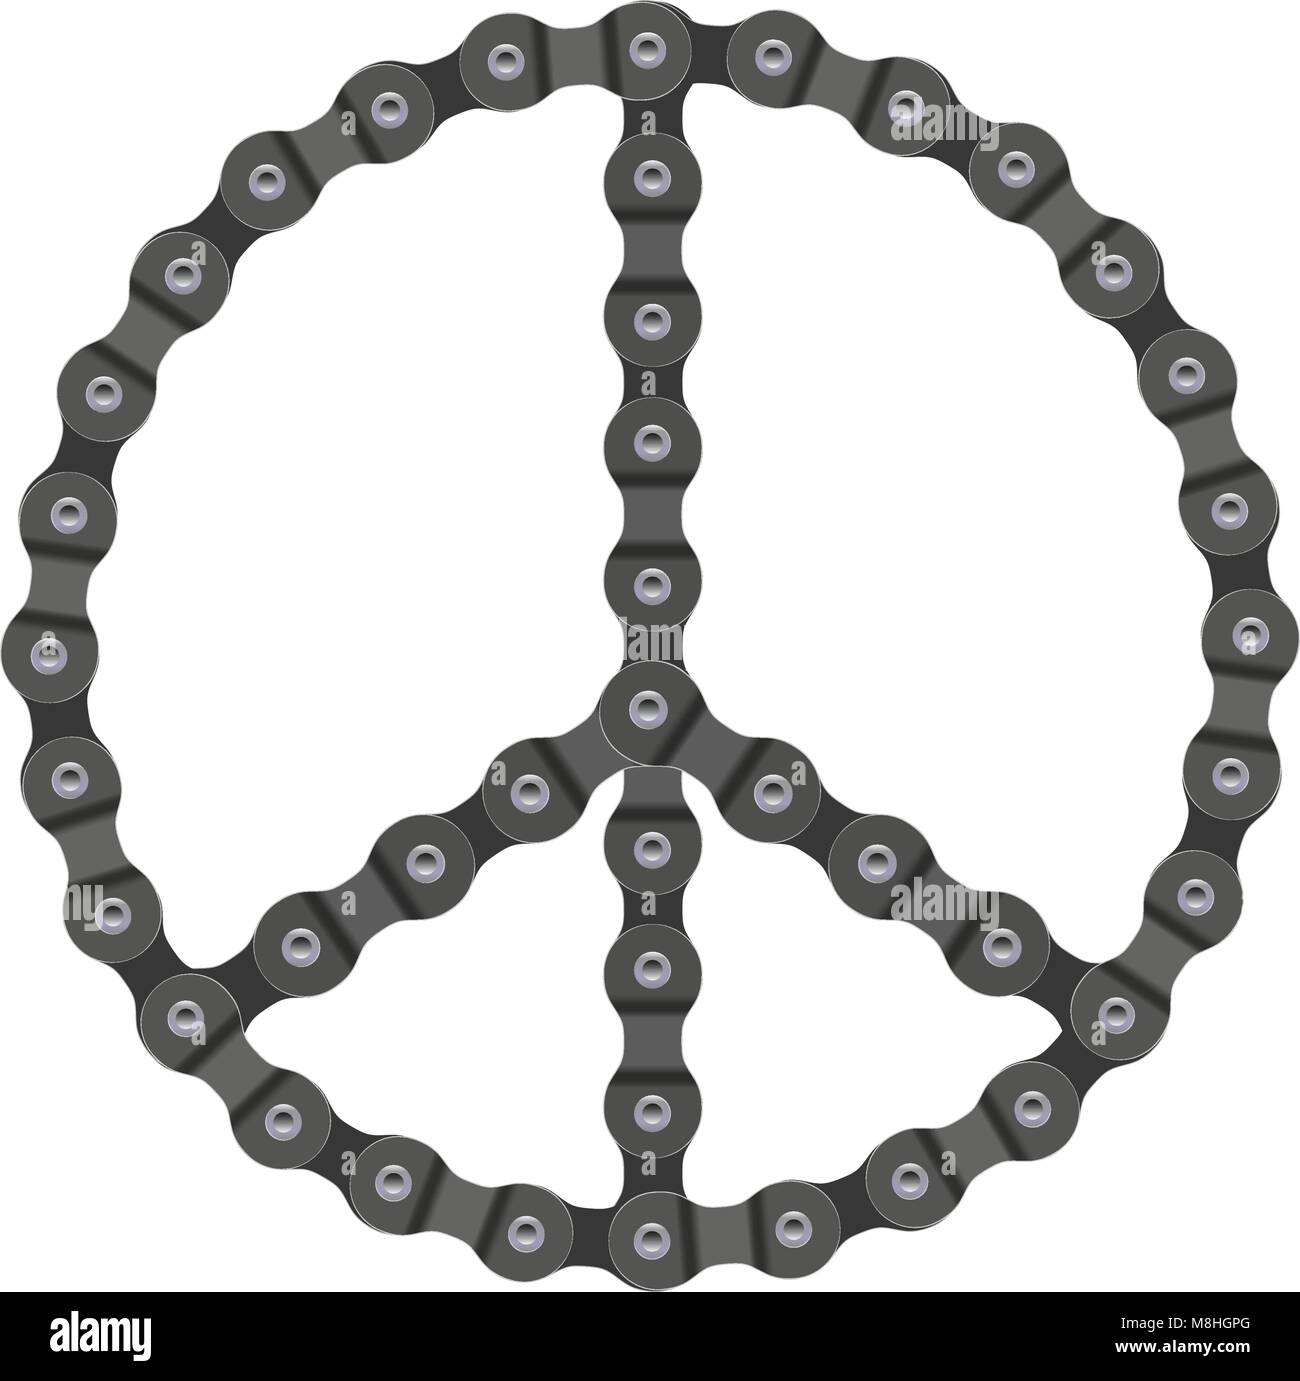 Vector Peace Sign Made of Bike or Bicycle Chain Stock Vector